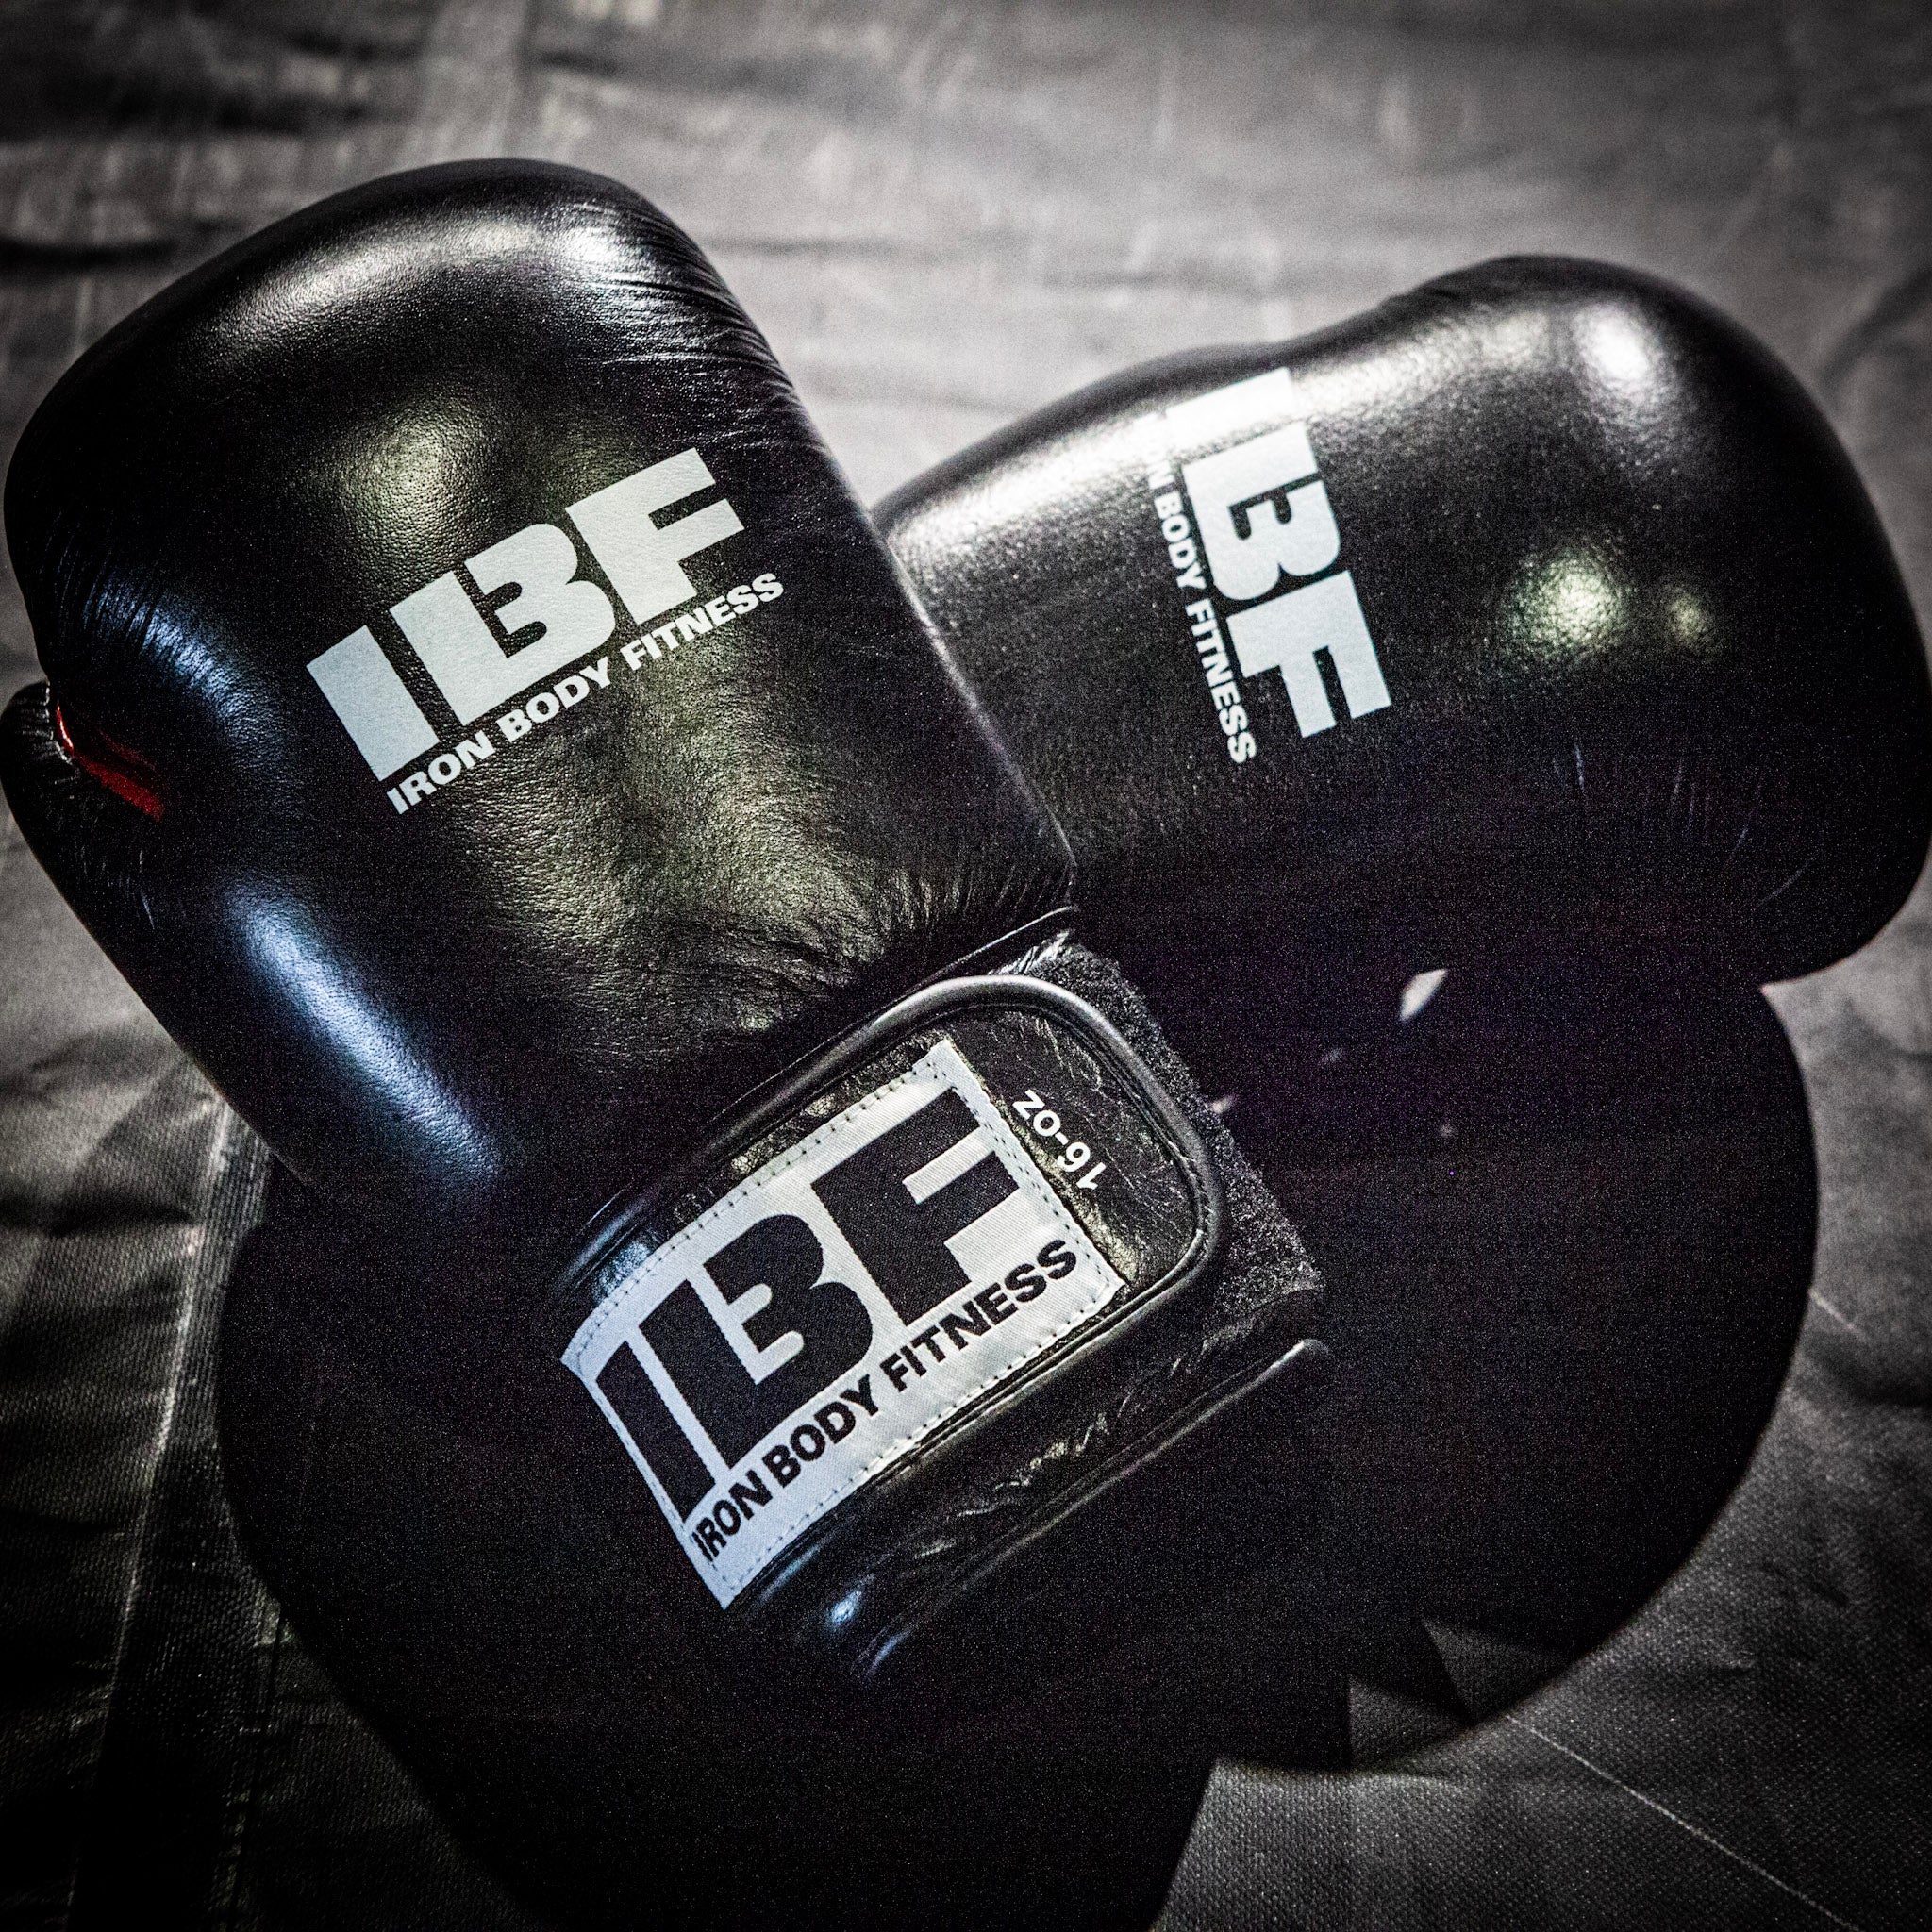 IBF Pro Series Boxing Gloves, AIBA Certified, All Sizes Available